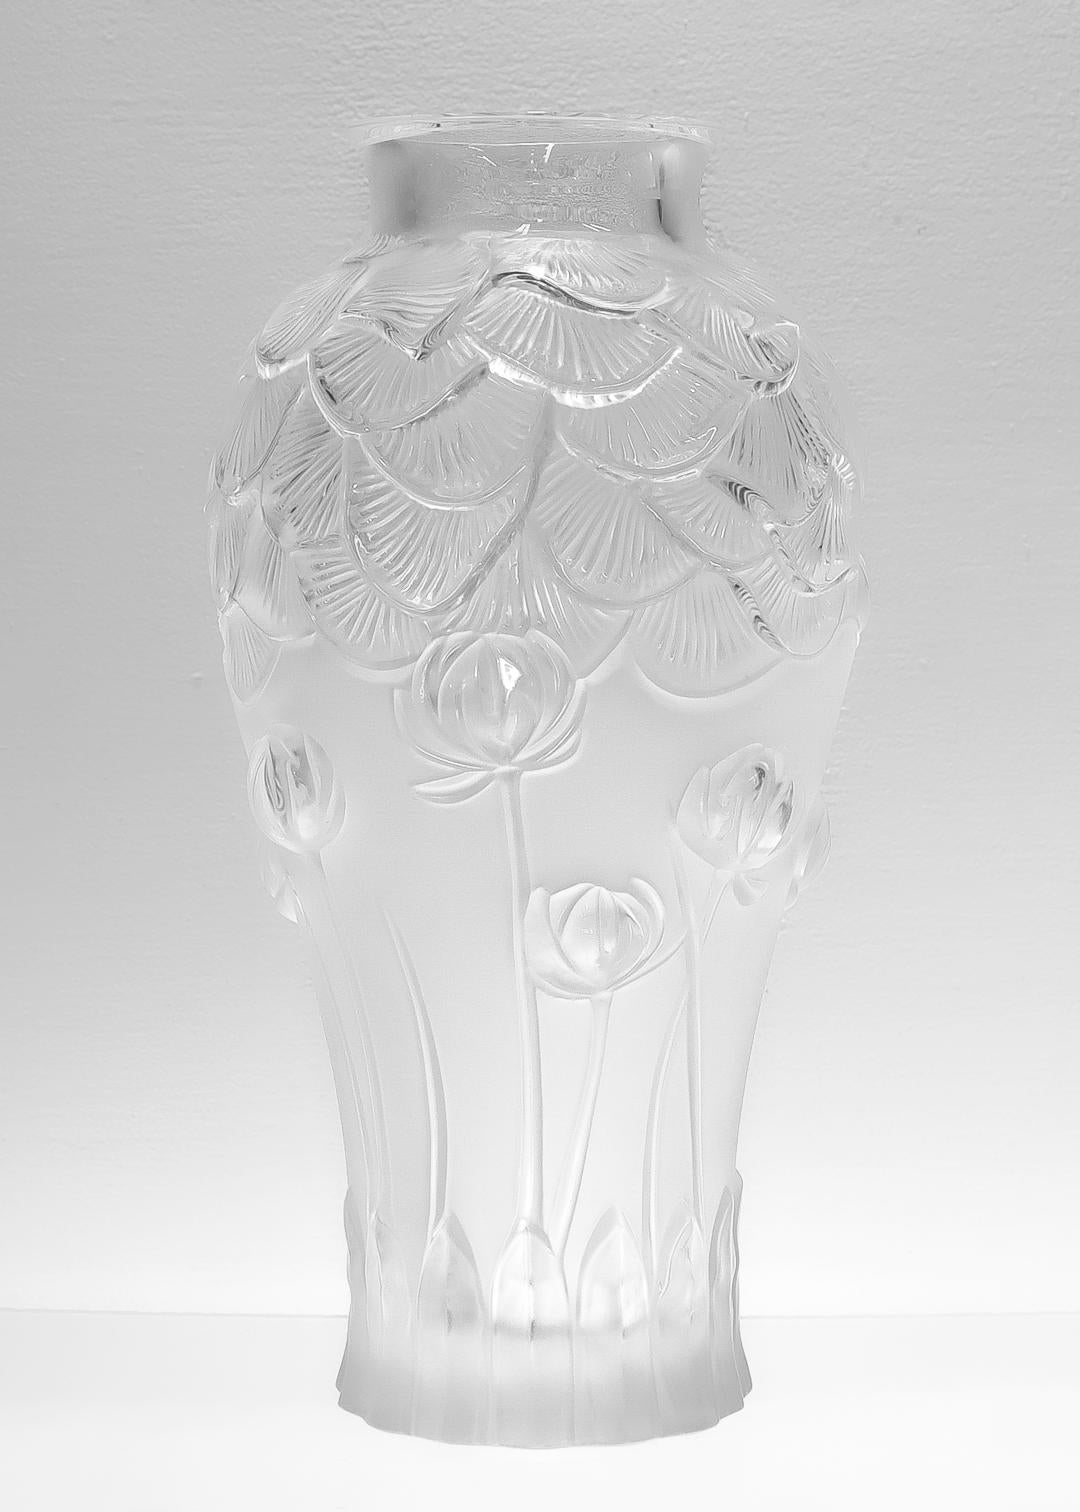 A fine, large Lalique glass or crystal flower vase.

In the Giverny pattern.

Model no. 1250000

In frosted Lalique glass with stylized water lily flowers and leaves around the circumference, transparent highlights, and a transparent rim.

Bearing